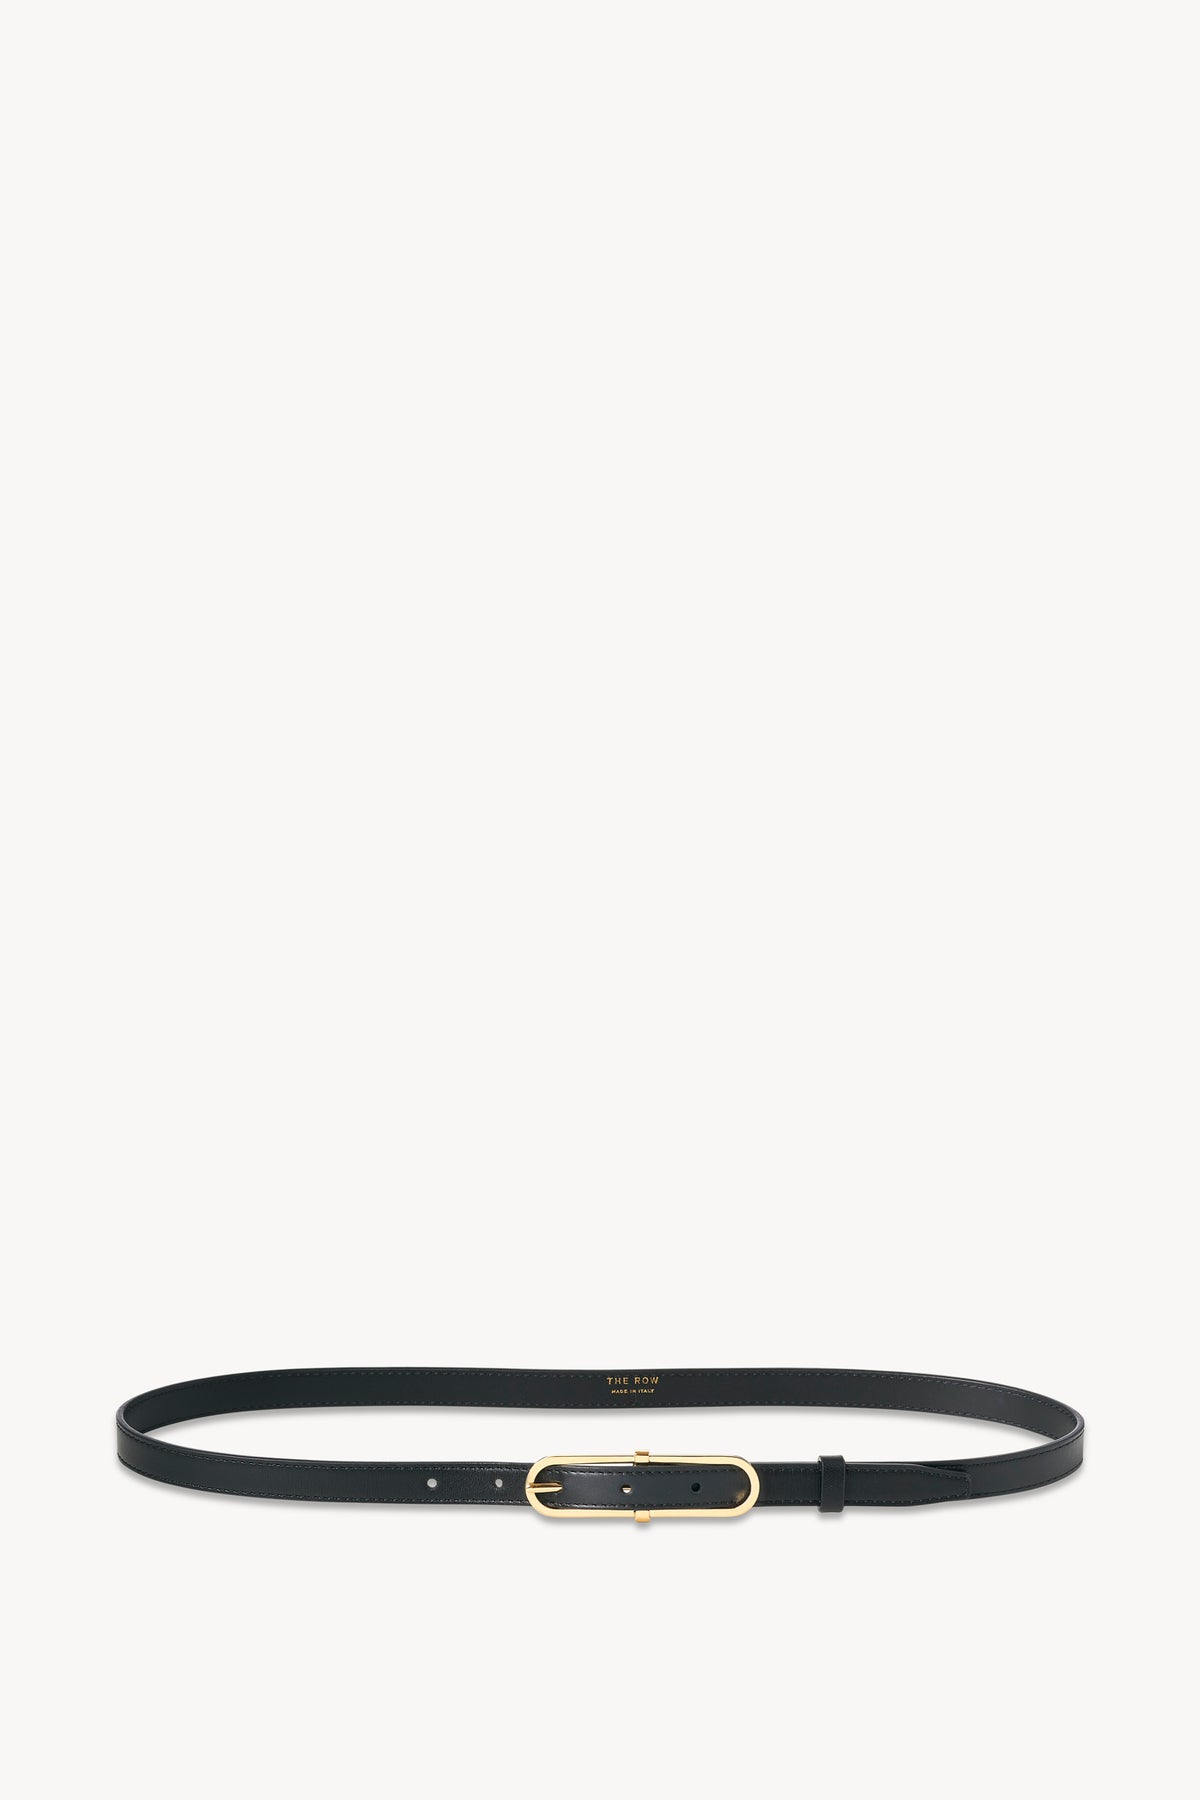 Hermine Belt in Leather